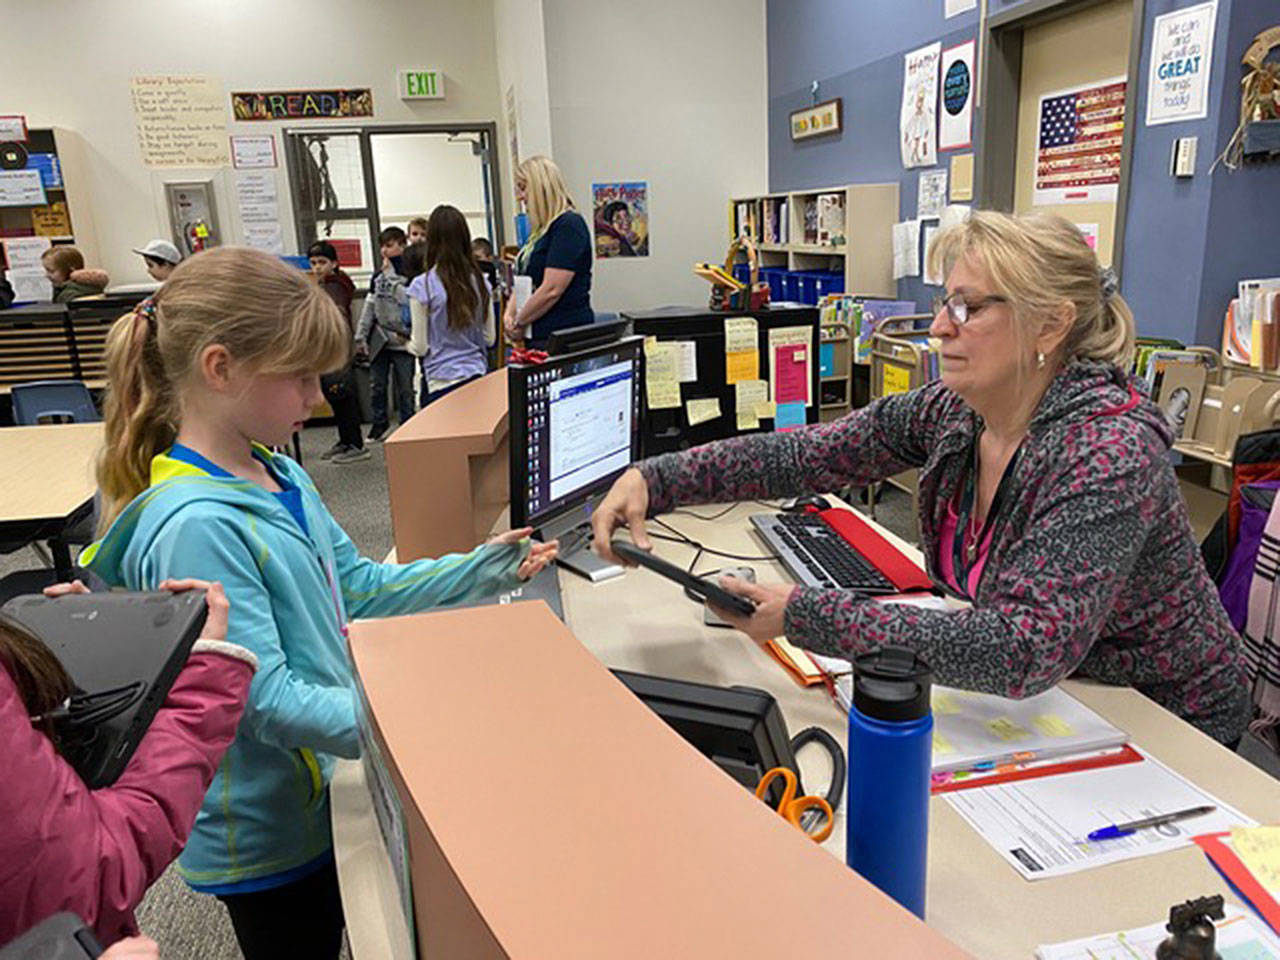 Close to 4,000 laptops were checked out to White River School District students days before Gov. Jay Inslee announced schools would close through April. Photo courtesy Brenda Sexton